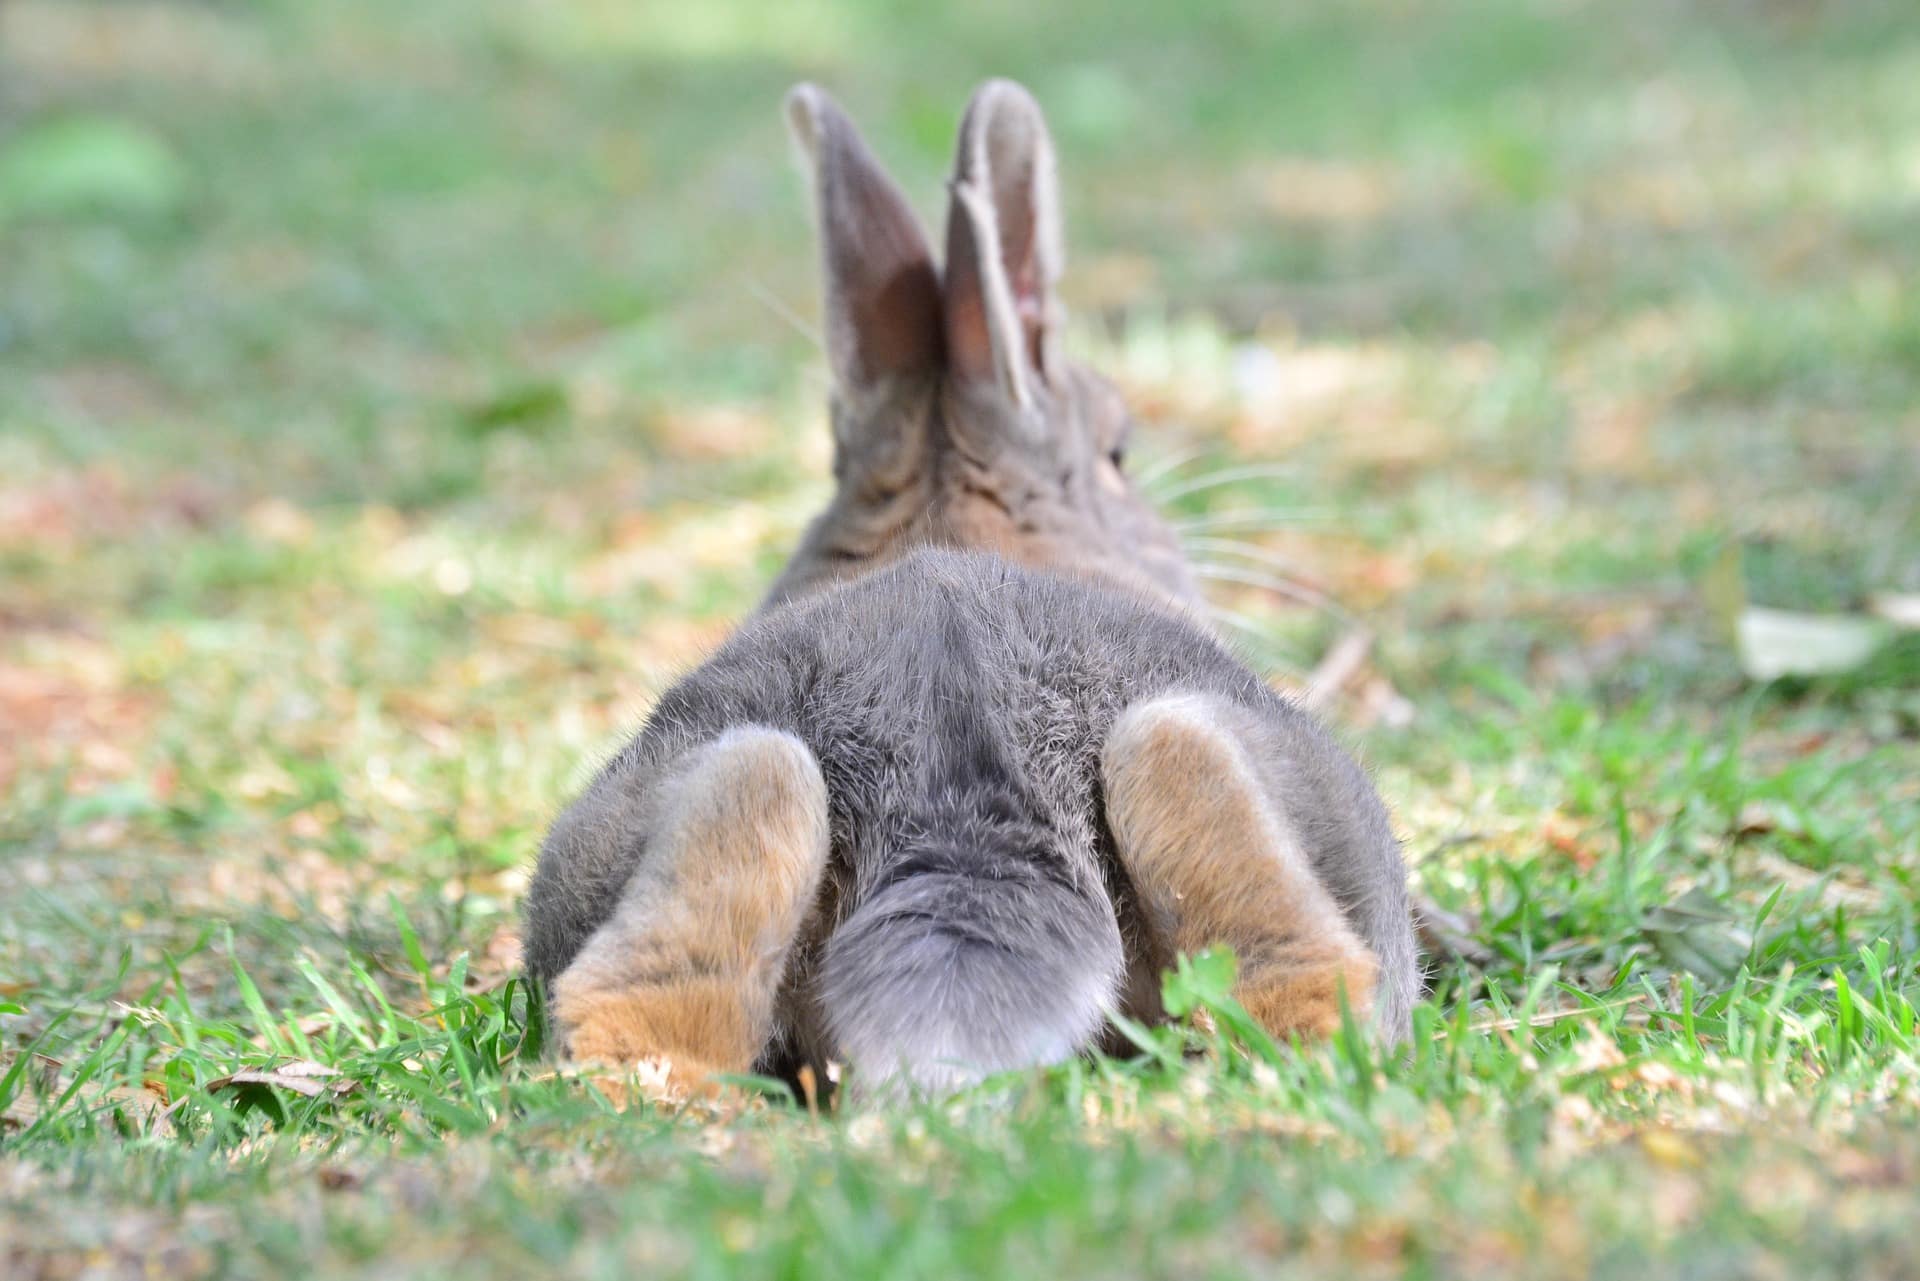 How Long Is A Rabbit'S Tail?